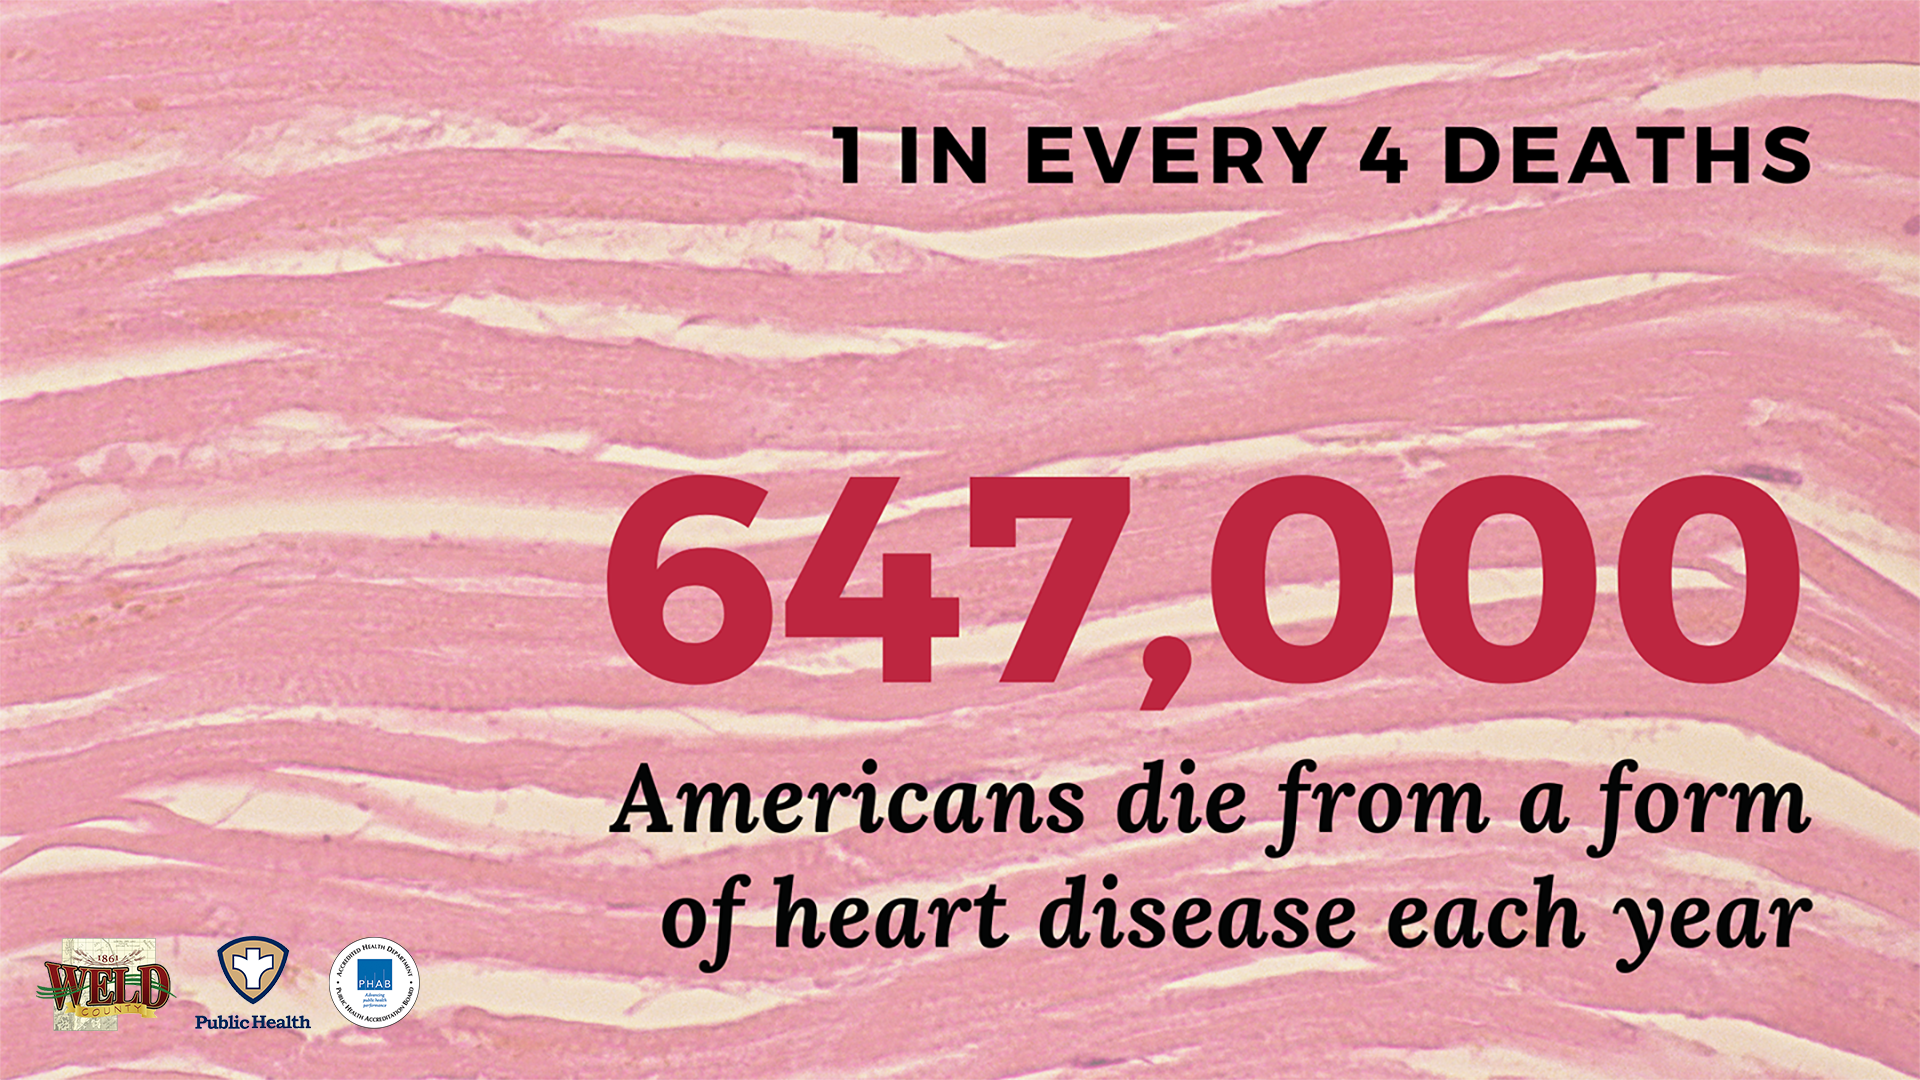 Heart disease causes 1 in every 4 deaths among Americans each year